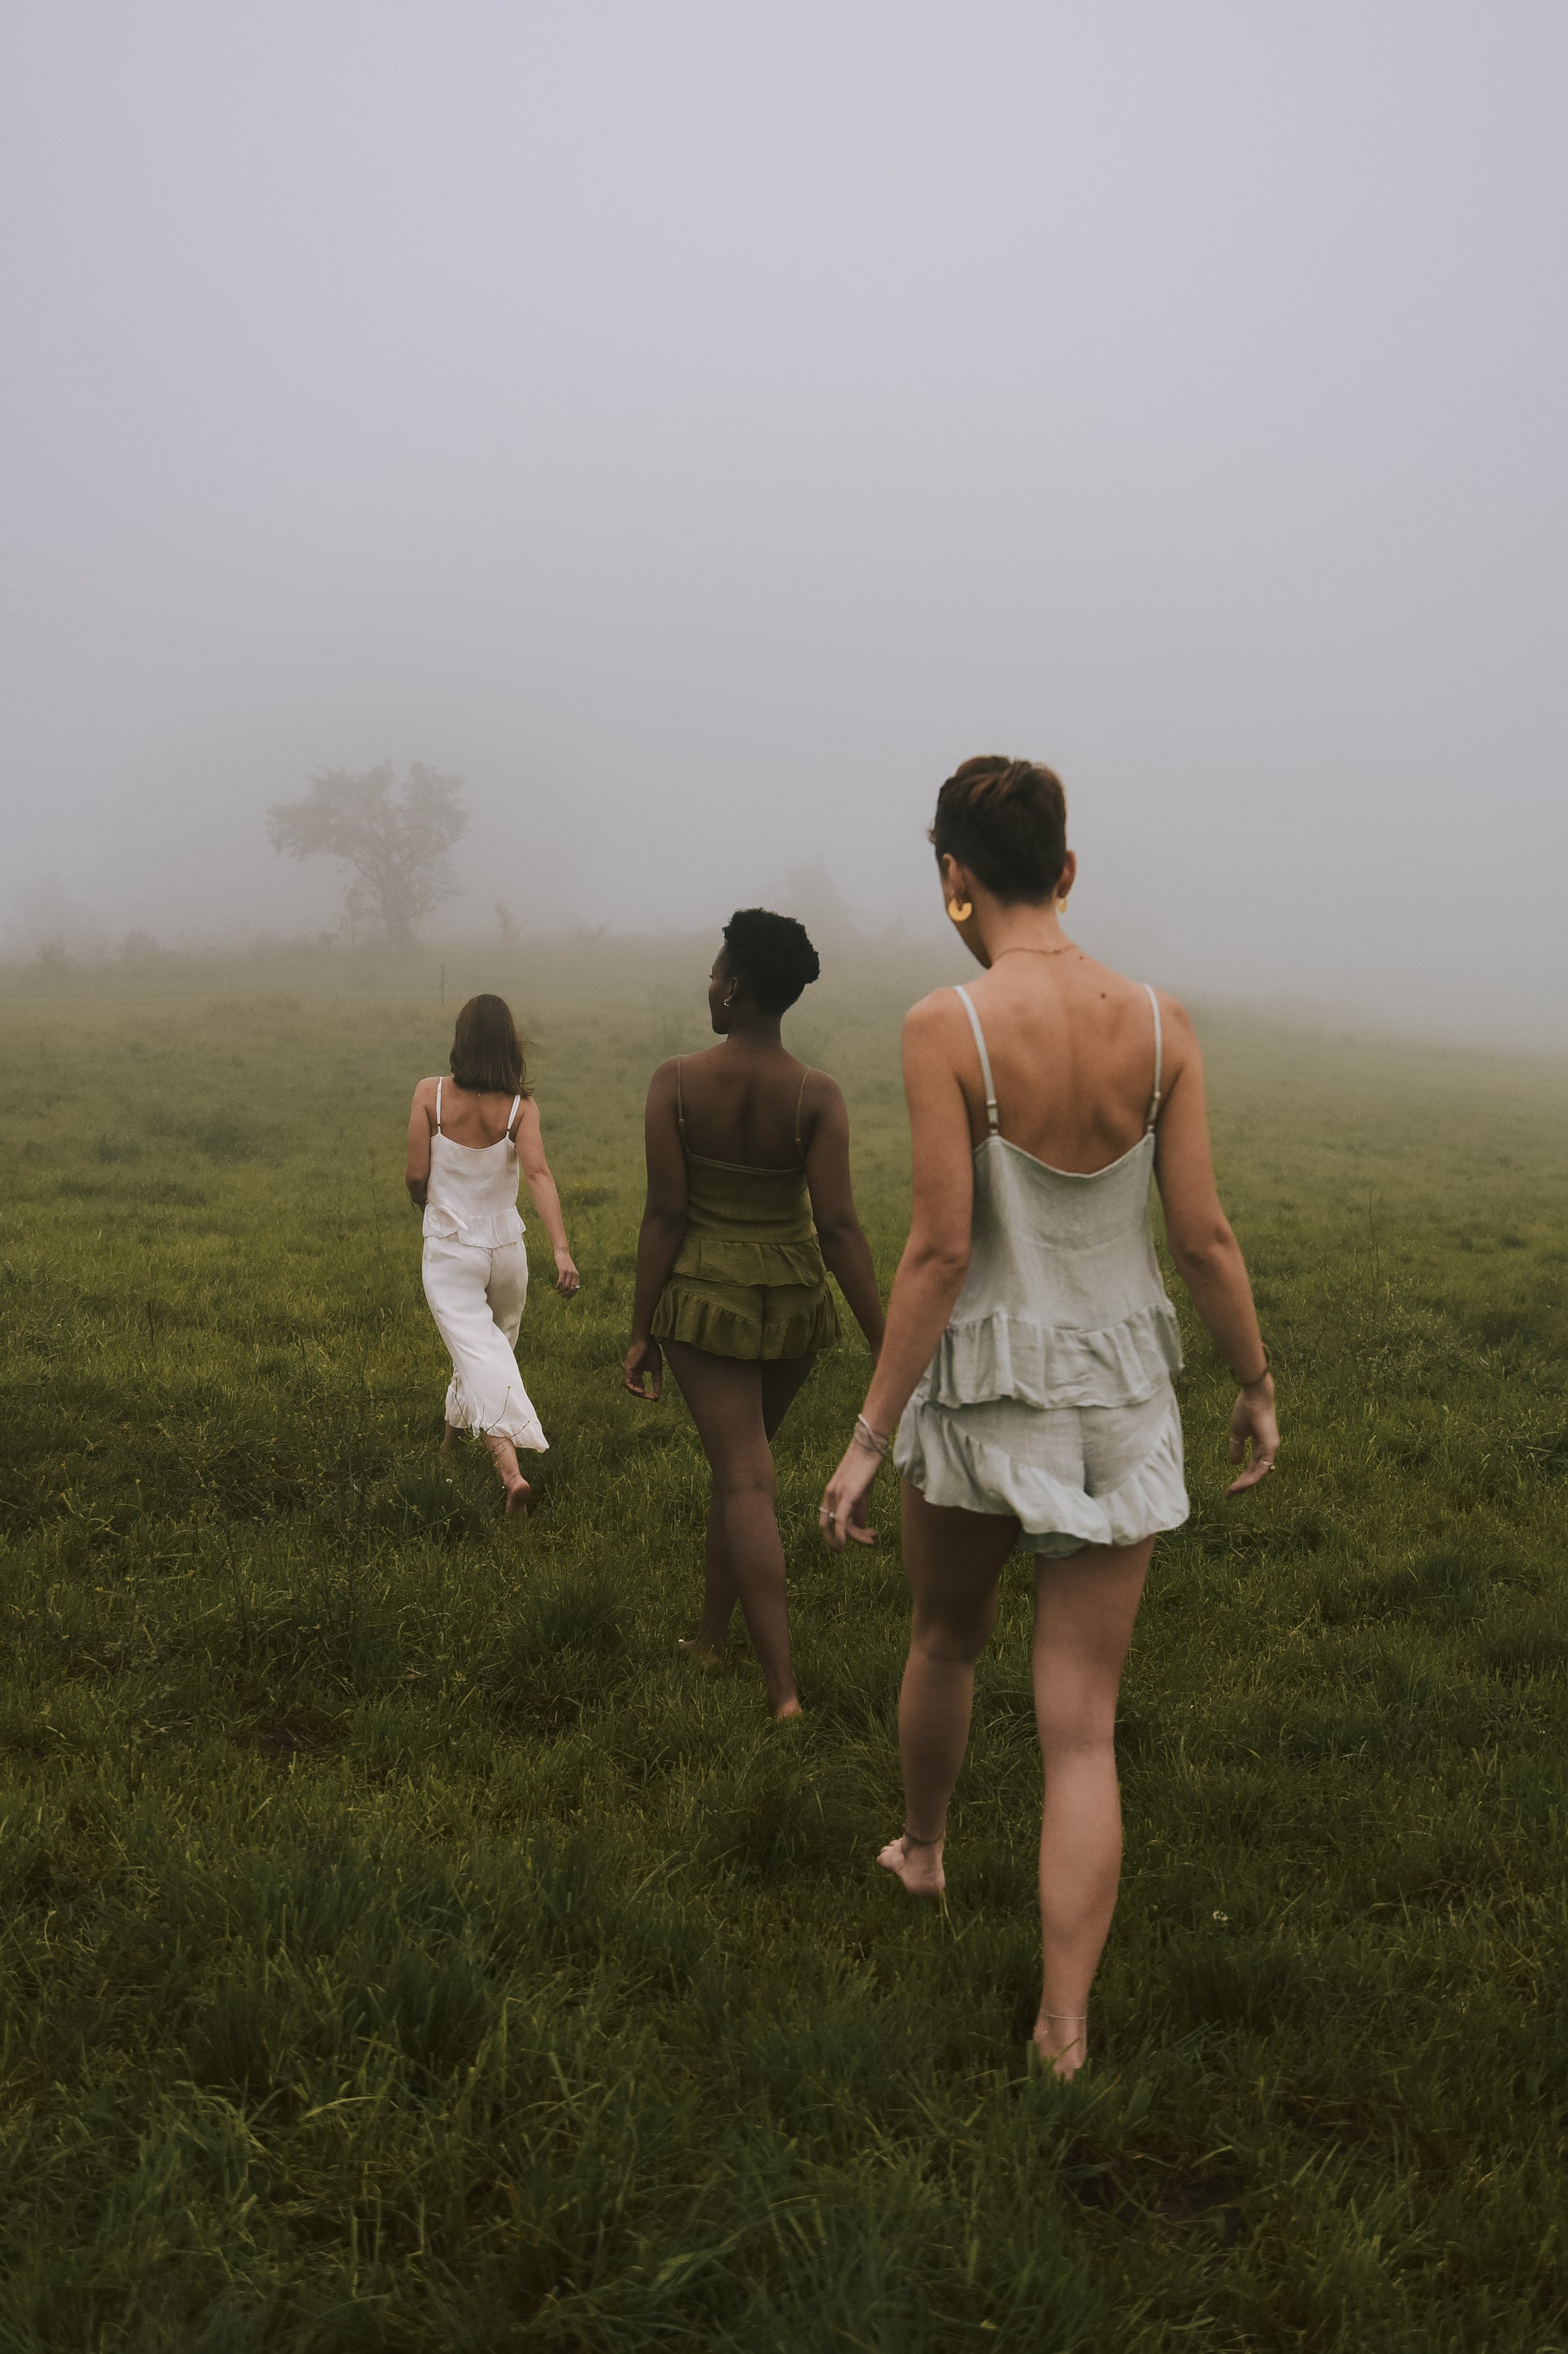 3 Women walk through a green field in single file on a misty day, all wearing lounge wear sets of clothing made out of luxury linen fabric.